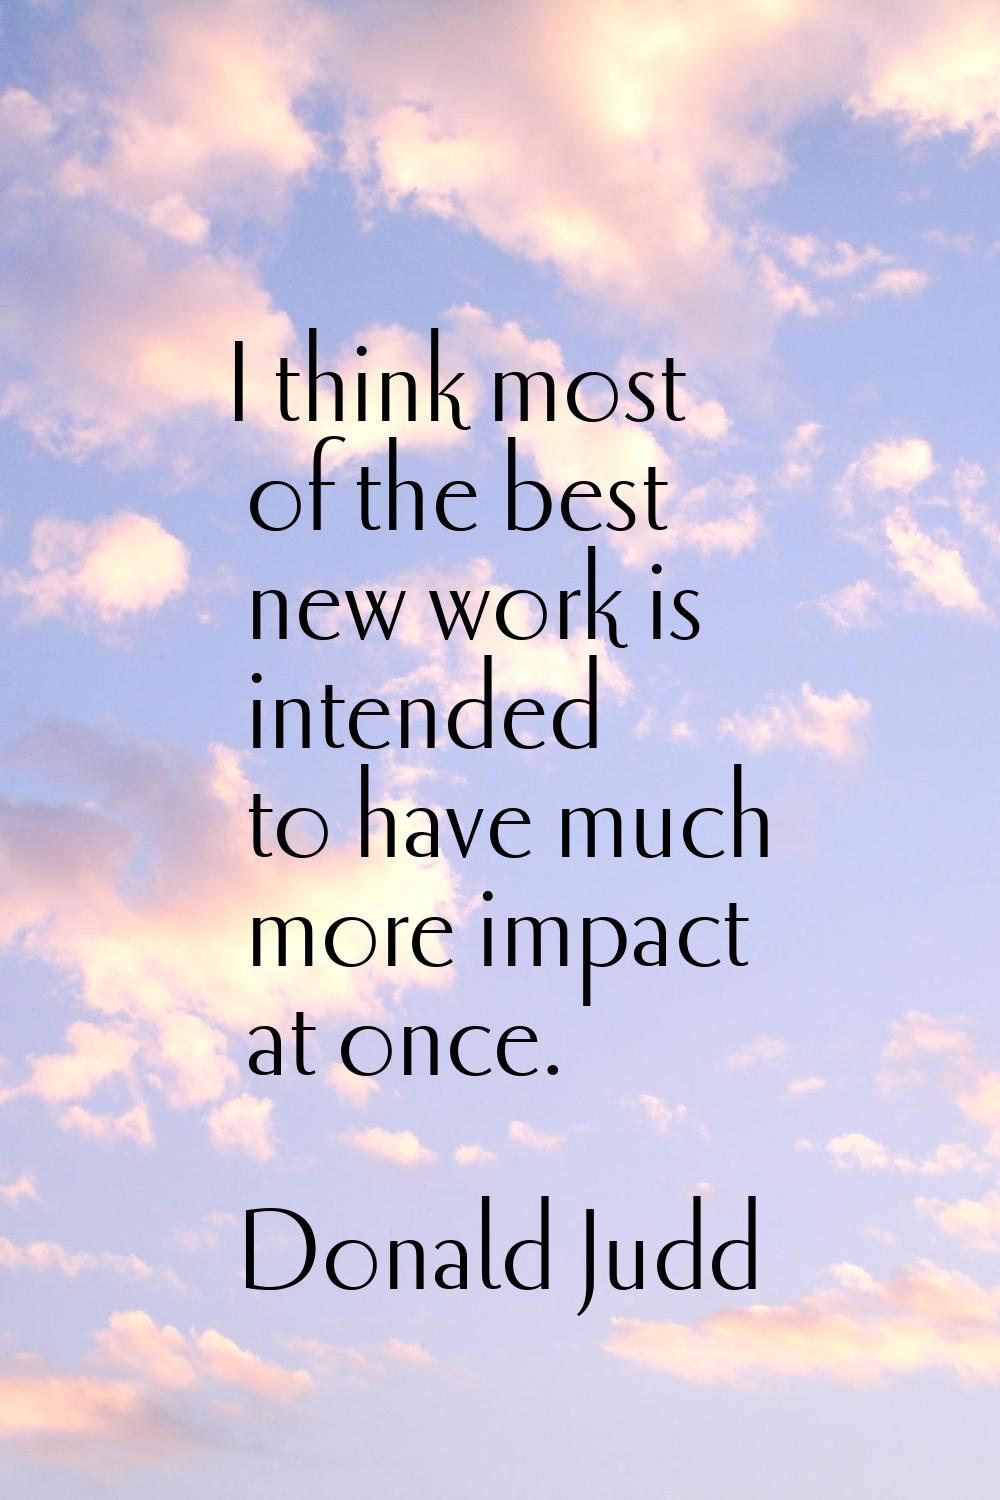 I think most of the best new work is intended to have much more impact at once.